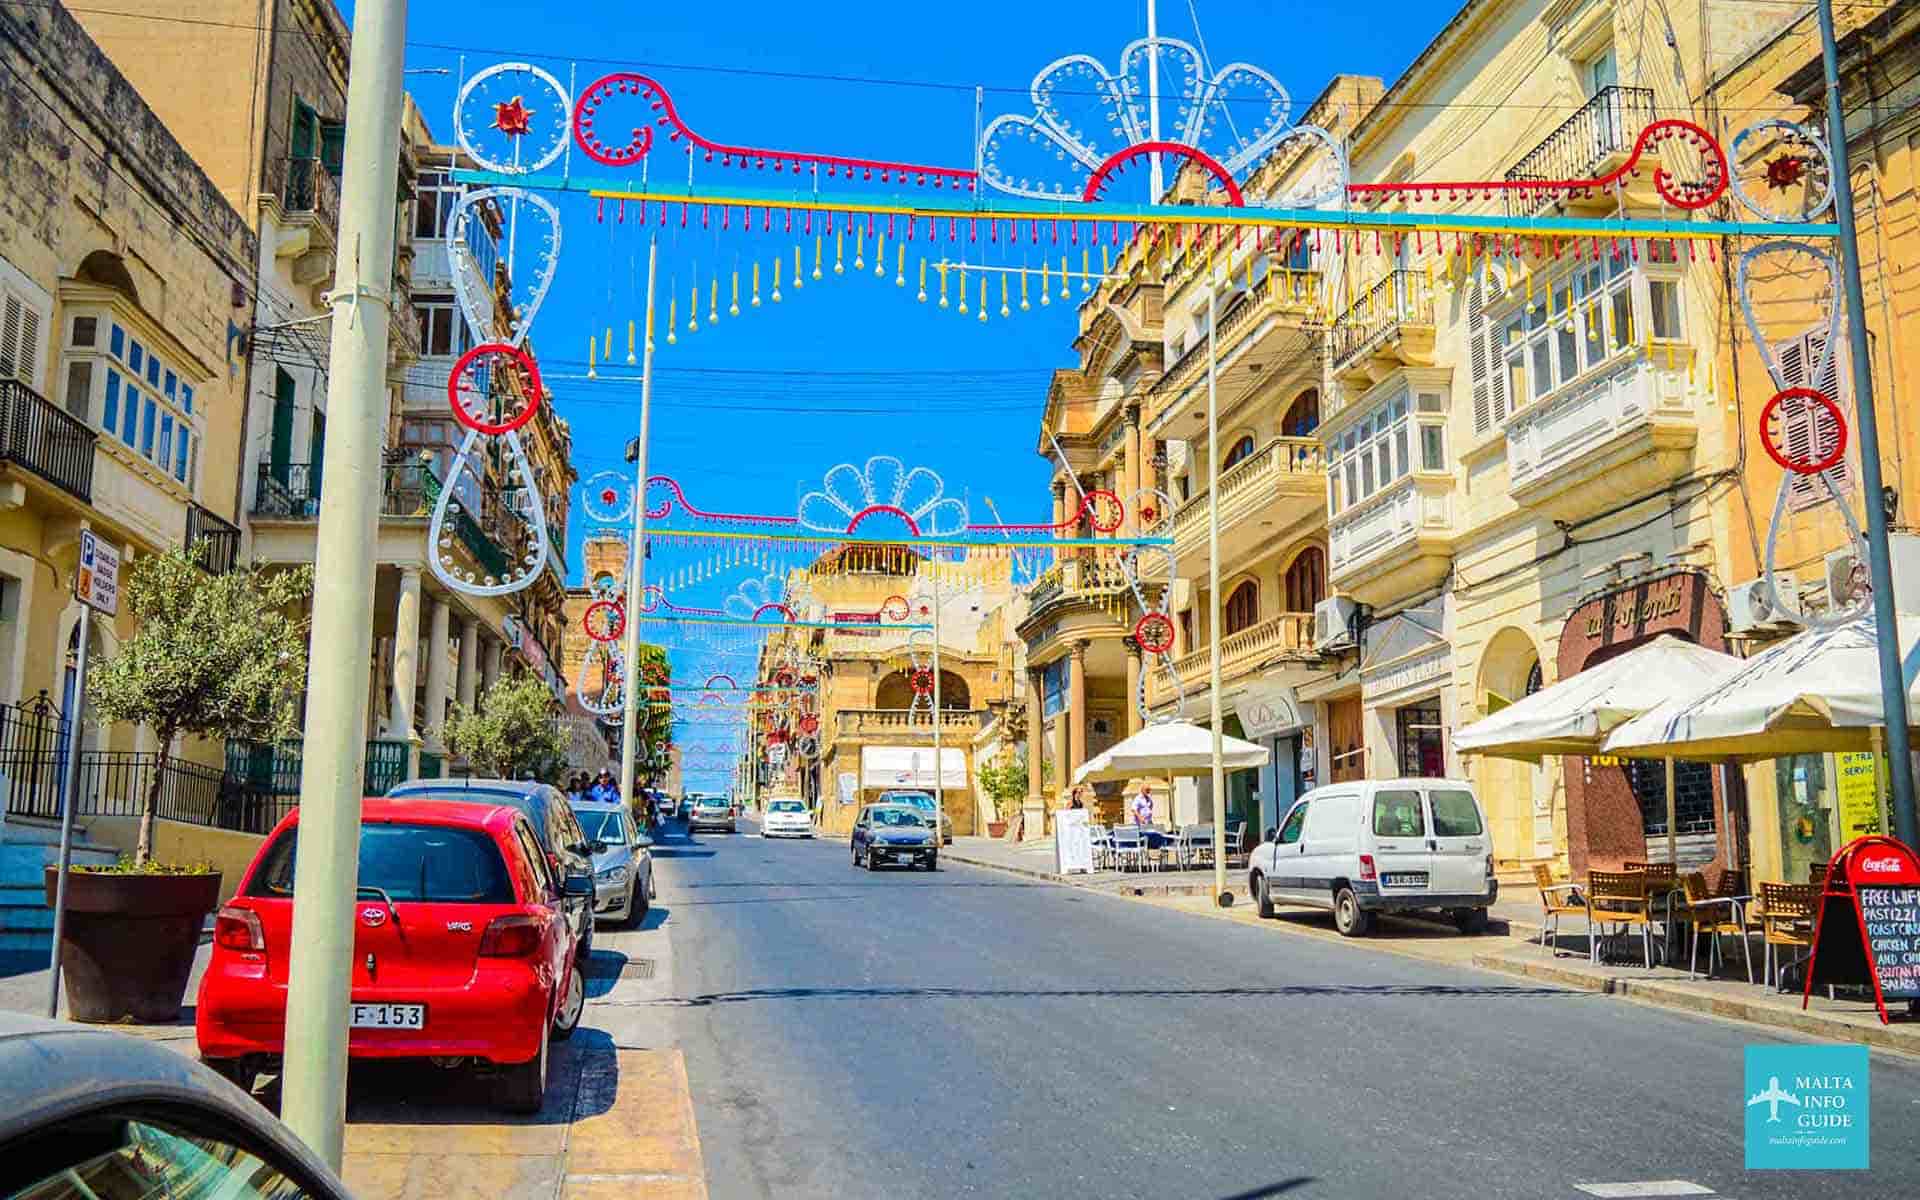 Cars driving in Malta on the main road in Gozo's capital city Victoria.